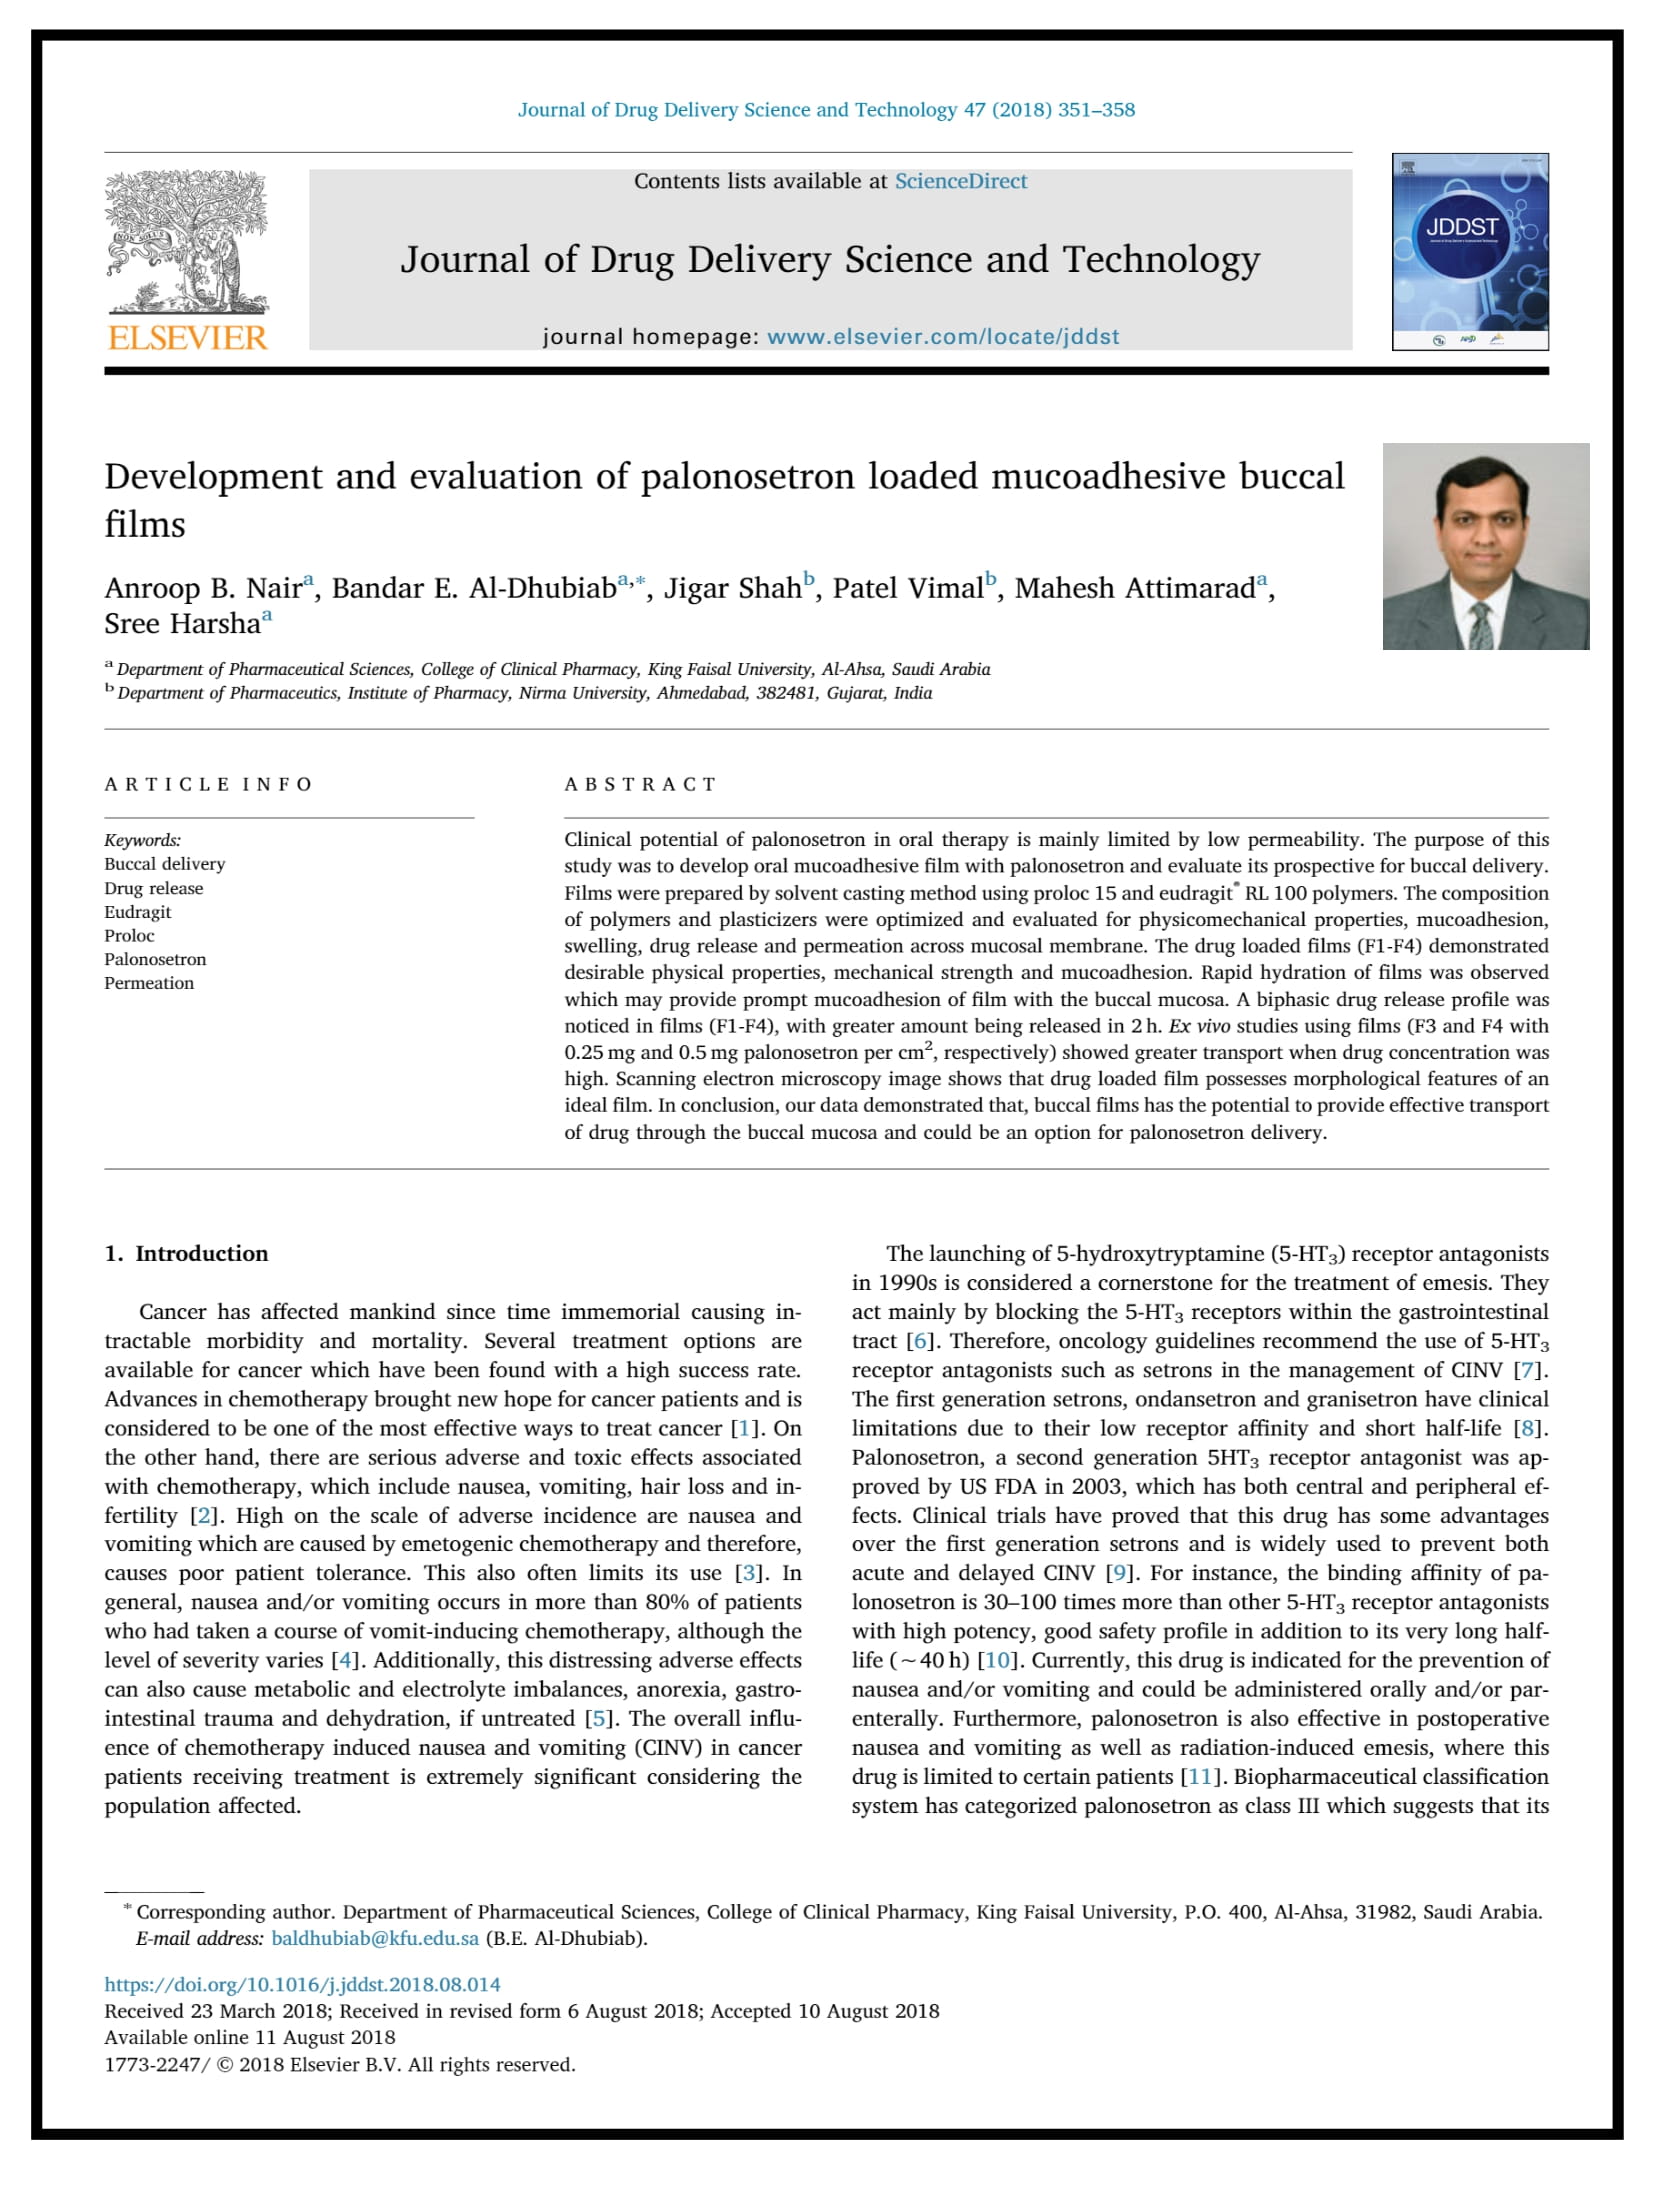 Development and evaluation of palonosetron loaded mucoadhesive buccal films